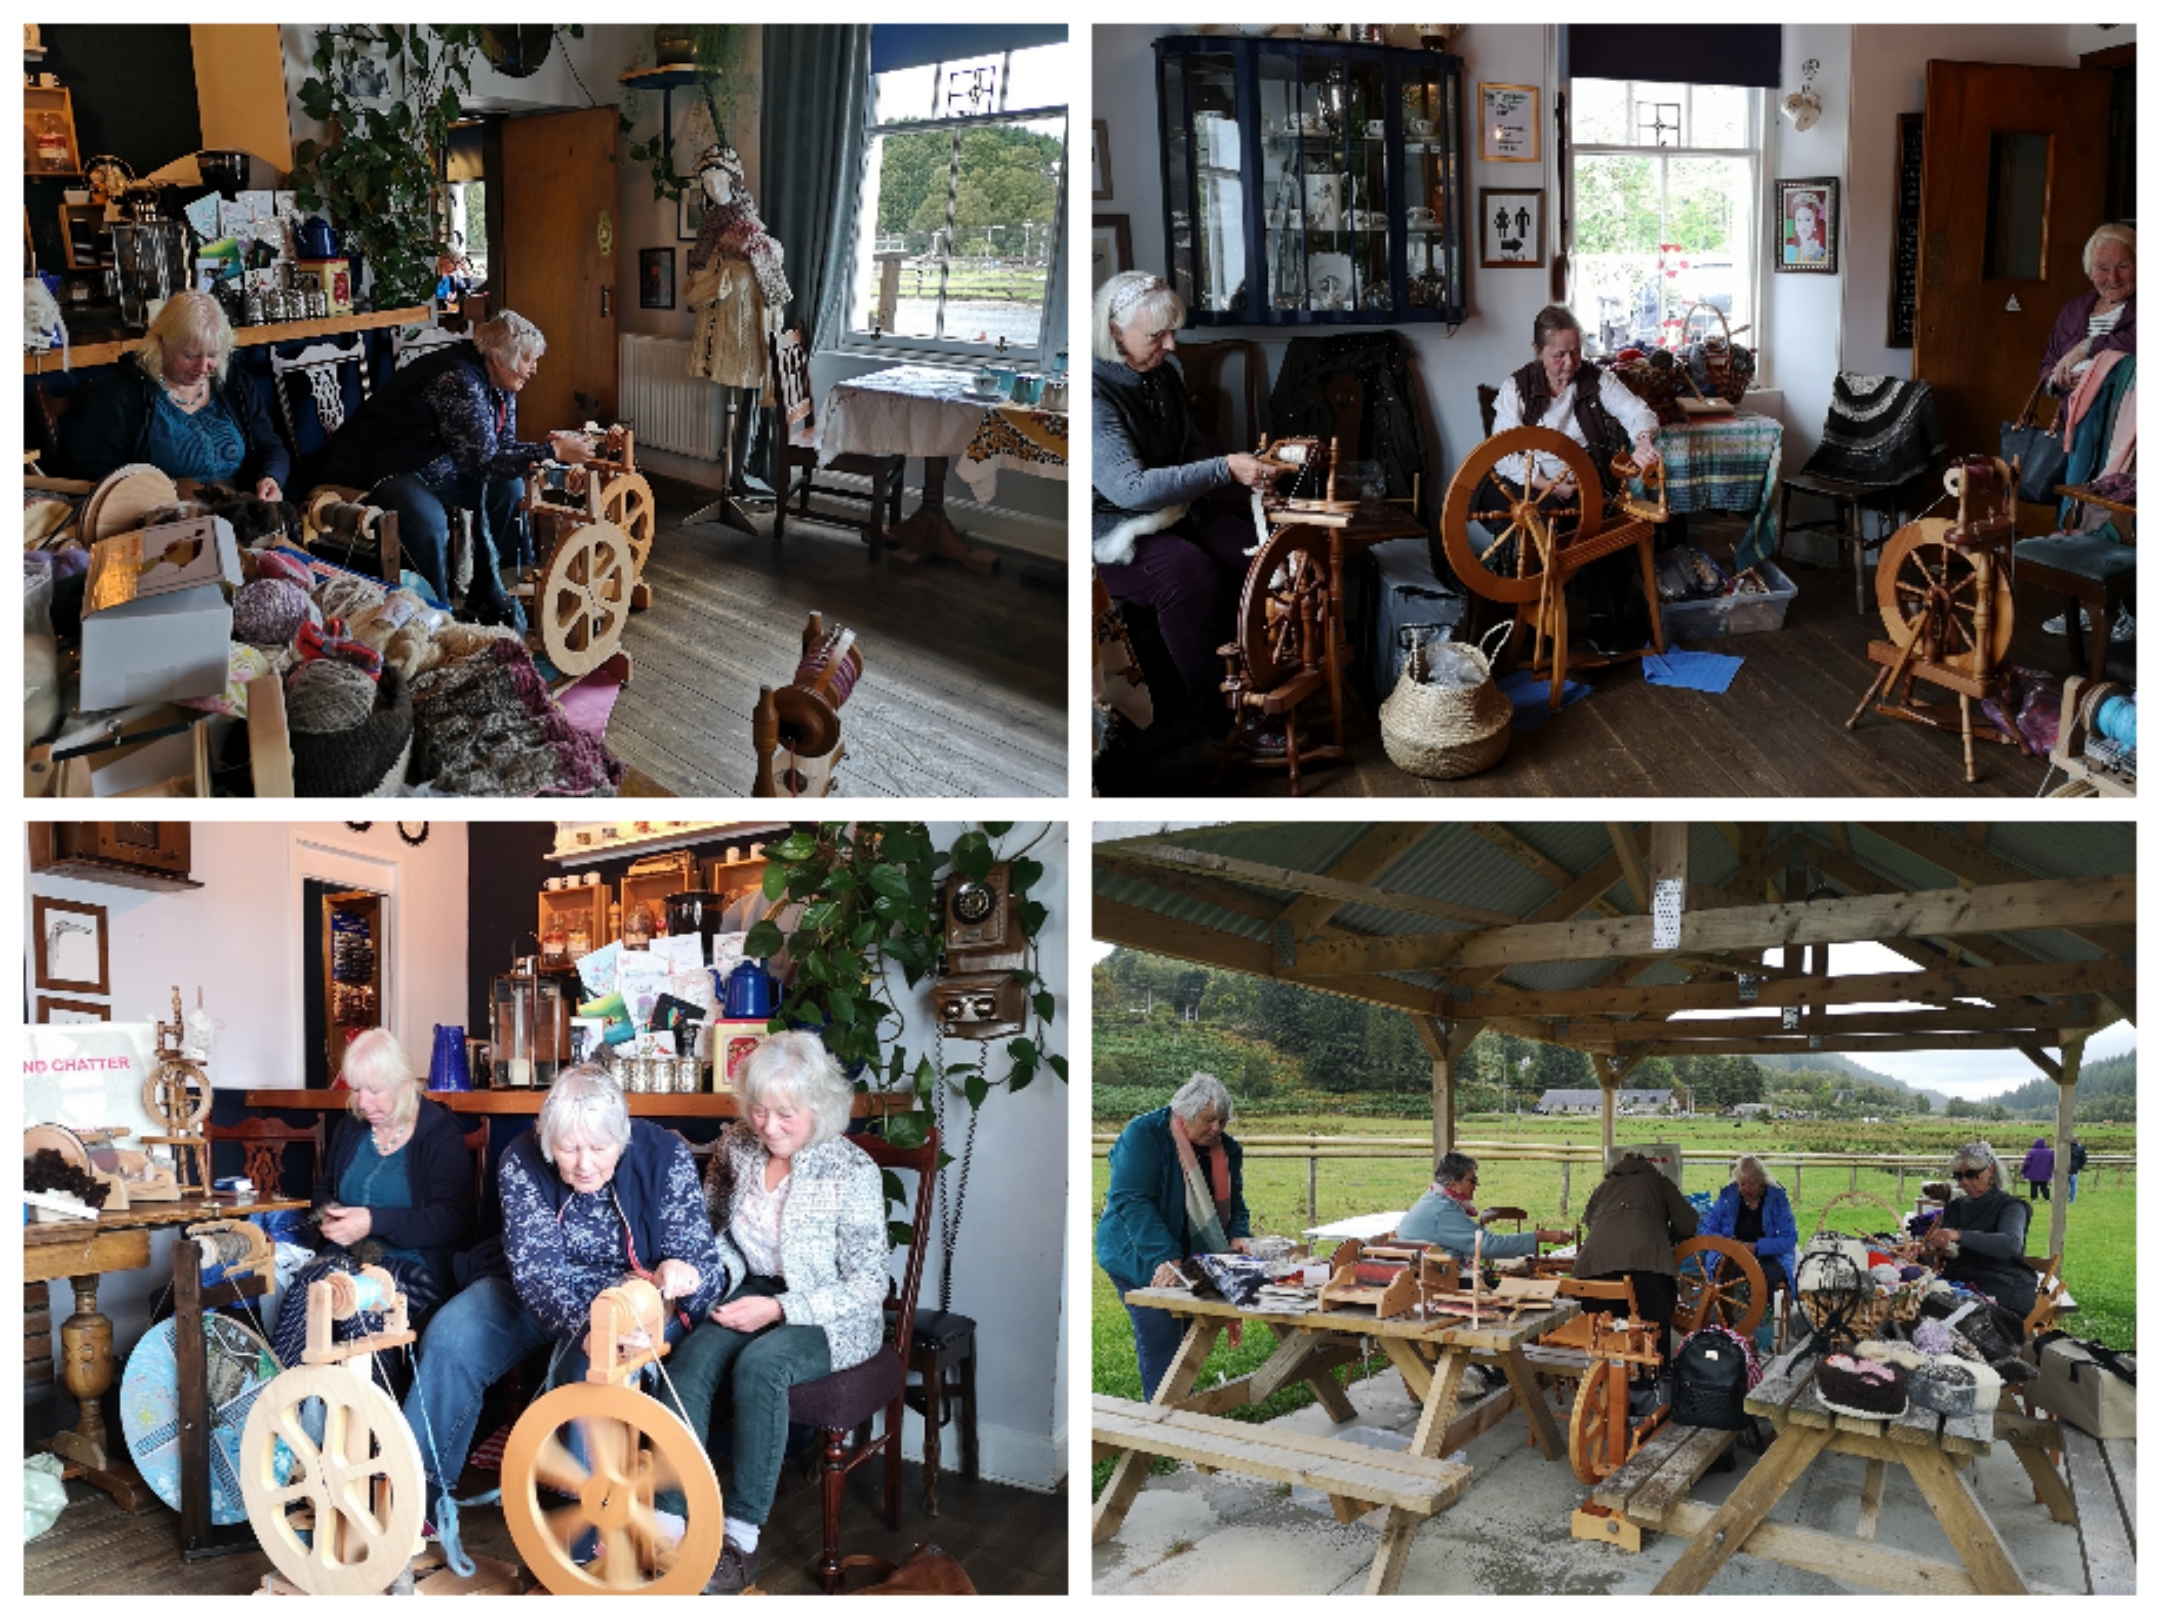 Stratherrick Spin and Chatter Group